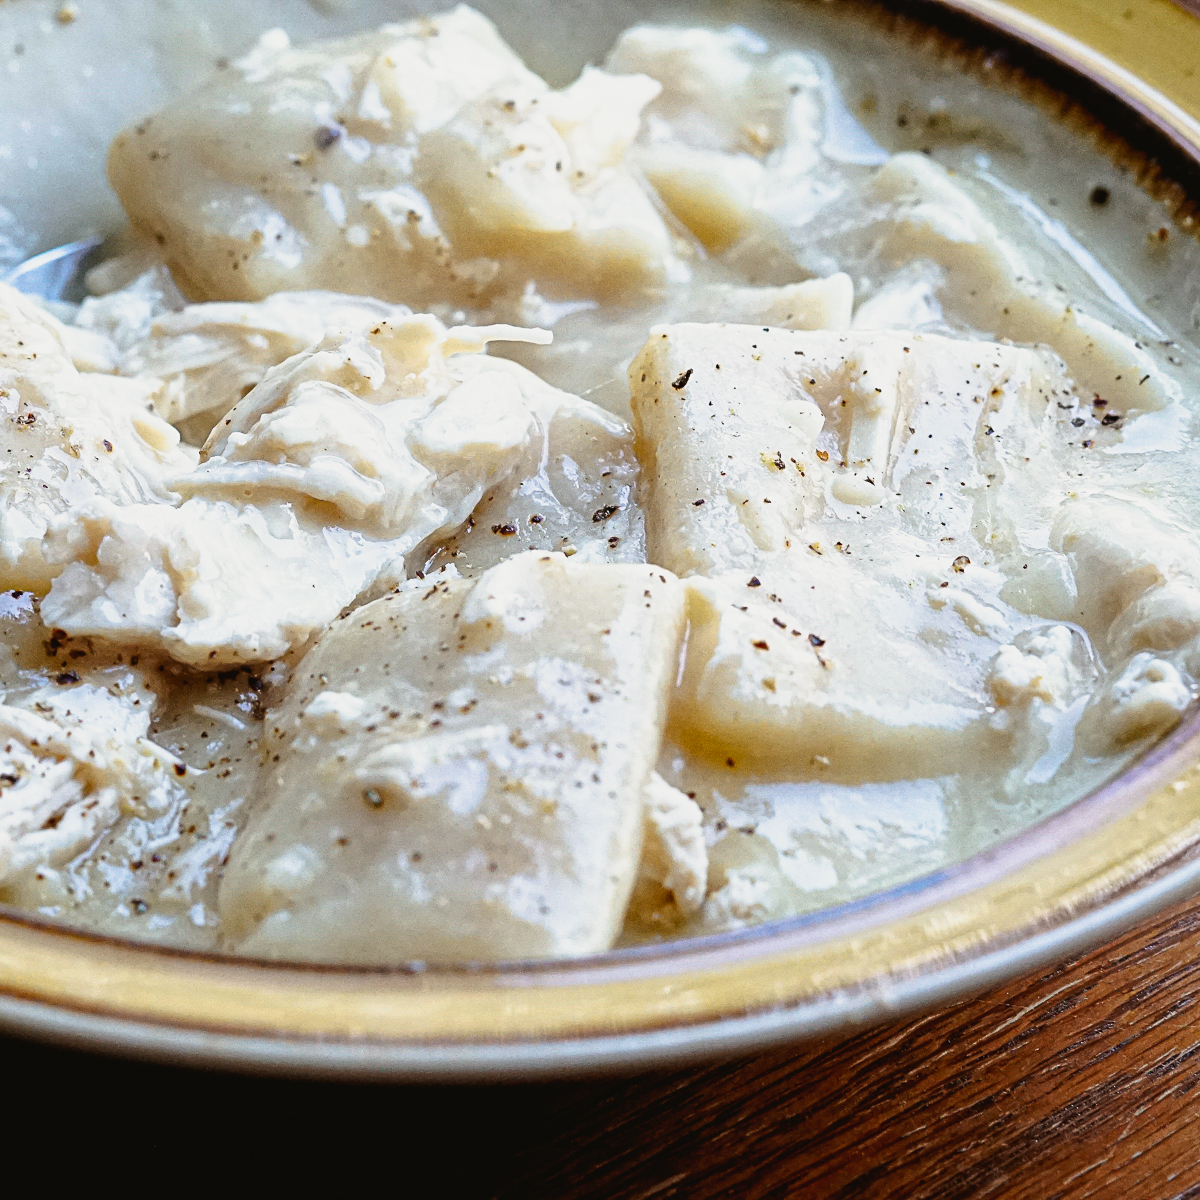 Homemade chicken and dumplings with salt and pepper